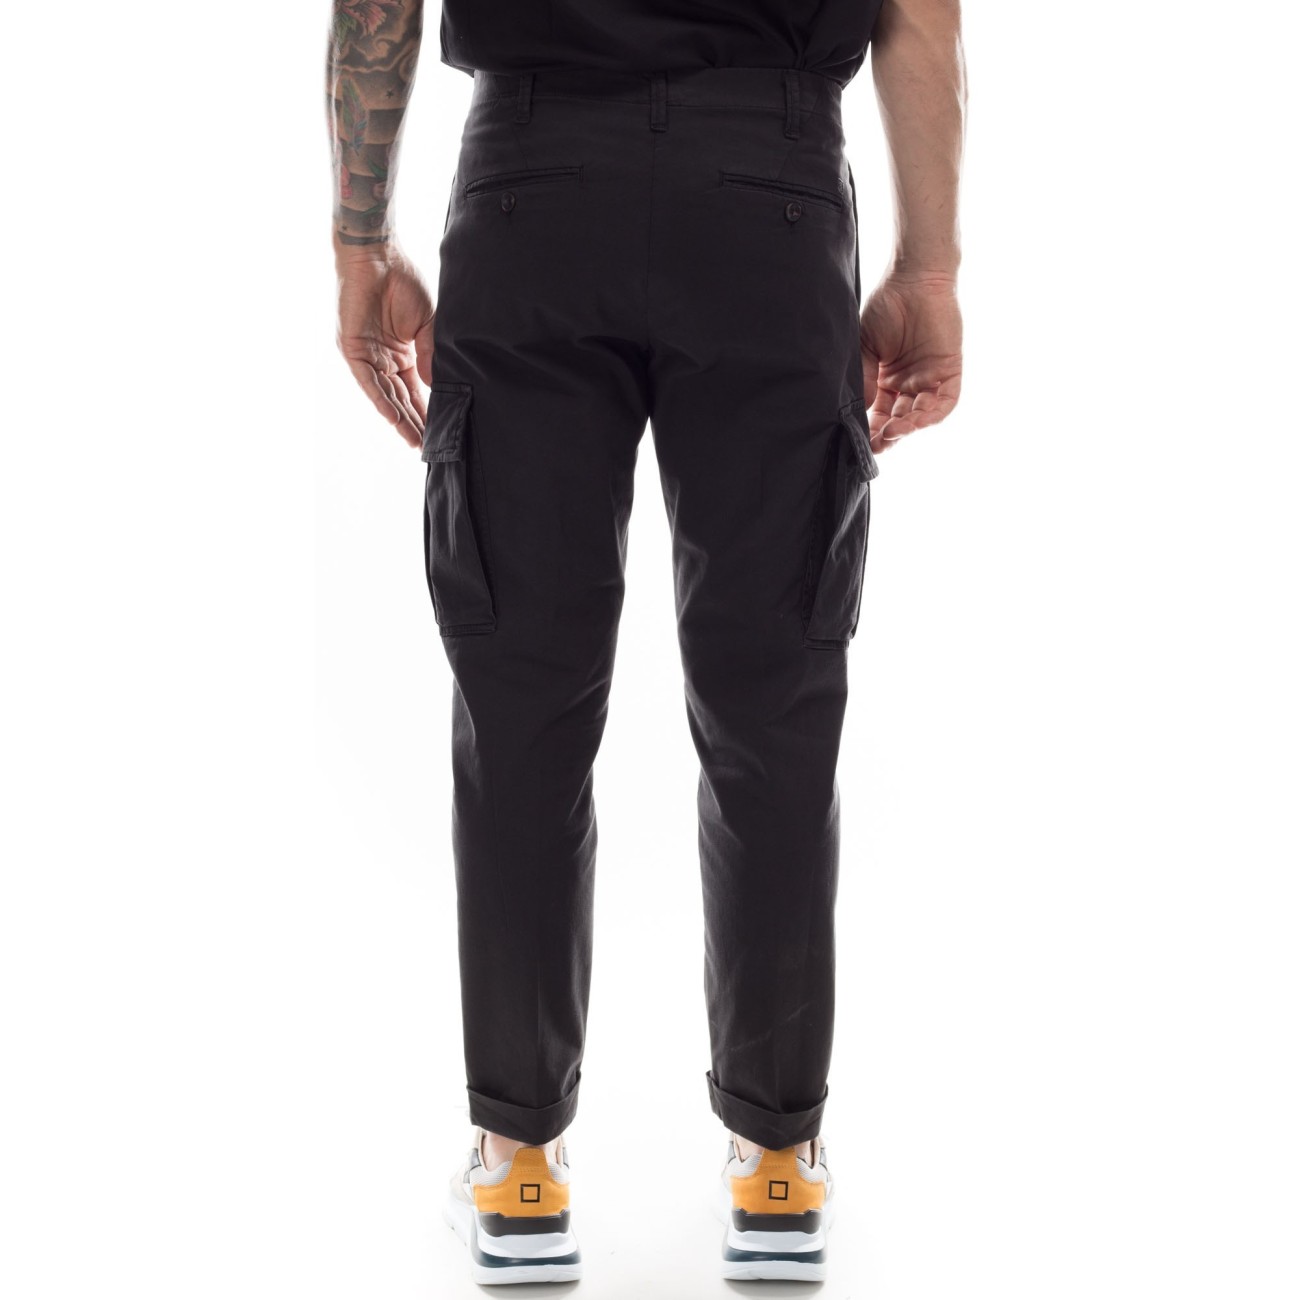 Black chino pant outfit...